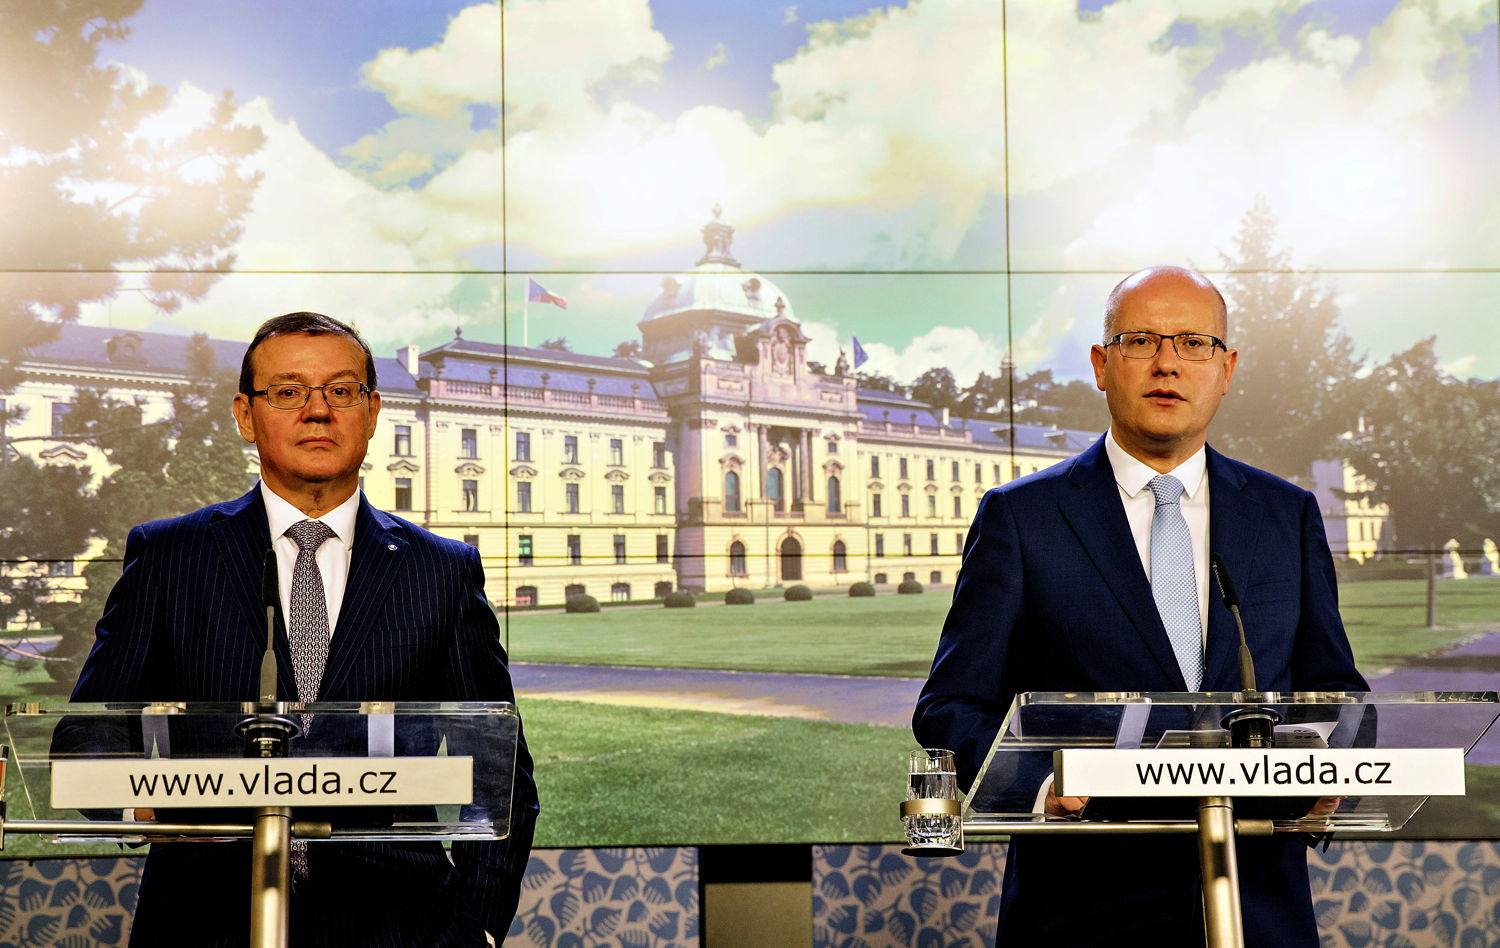 Czech Prime Minister Bohuslav Sobotka (right) and AutoSAP President Bohdan Wojnar at the signing of the future agreement, for which ŠKODA AUTO provided considerable impetus.